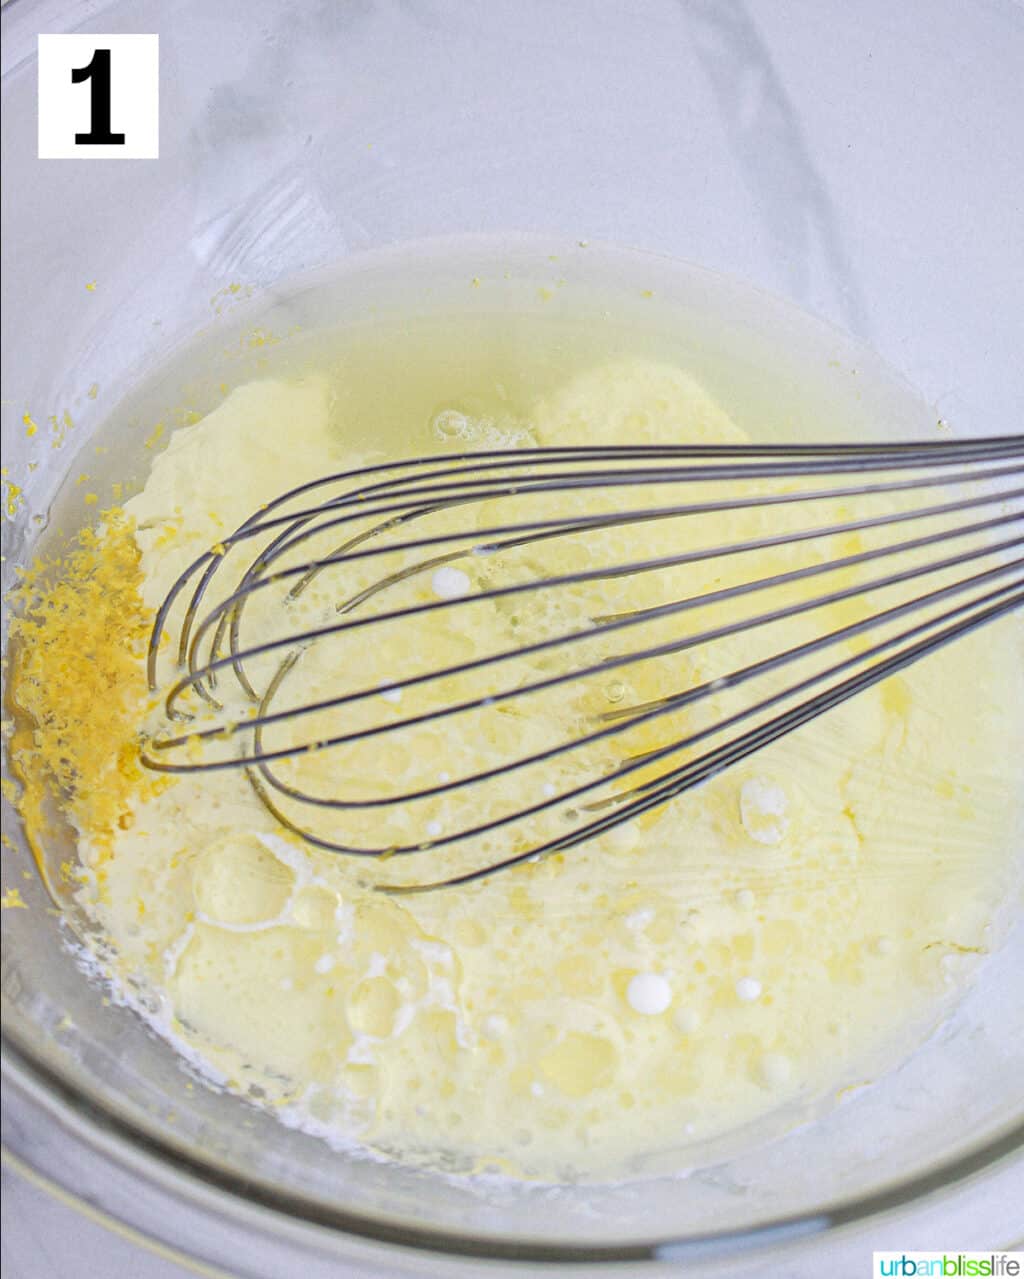 whisk in a bowl with cupcake batter.